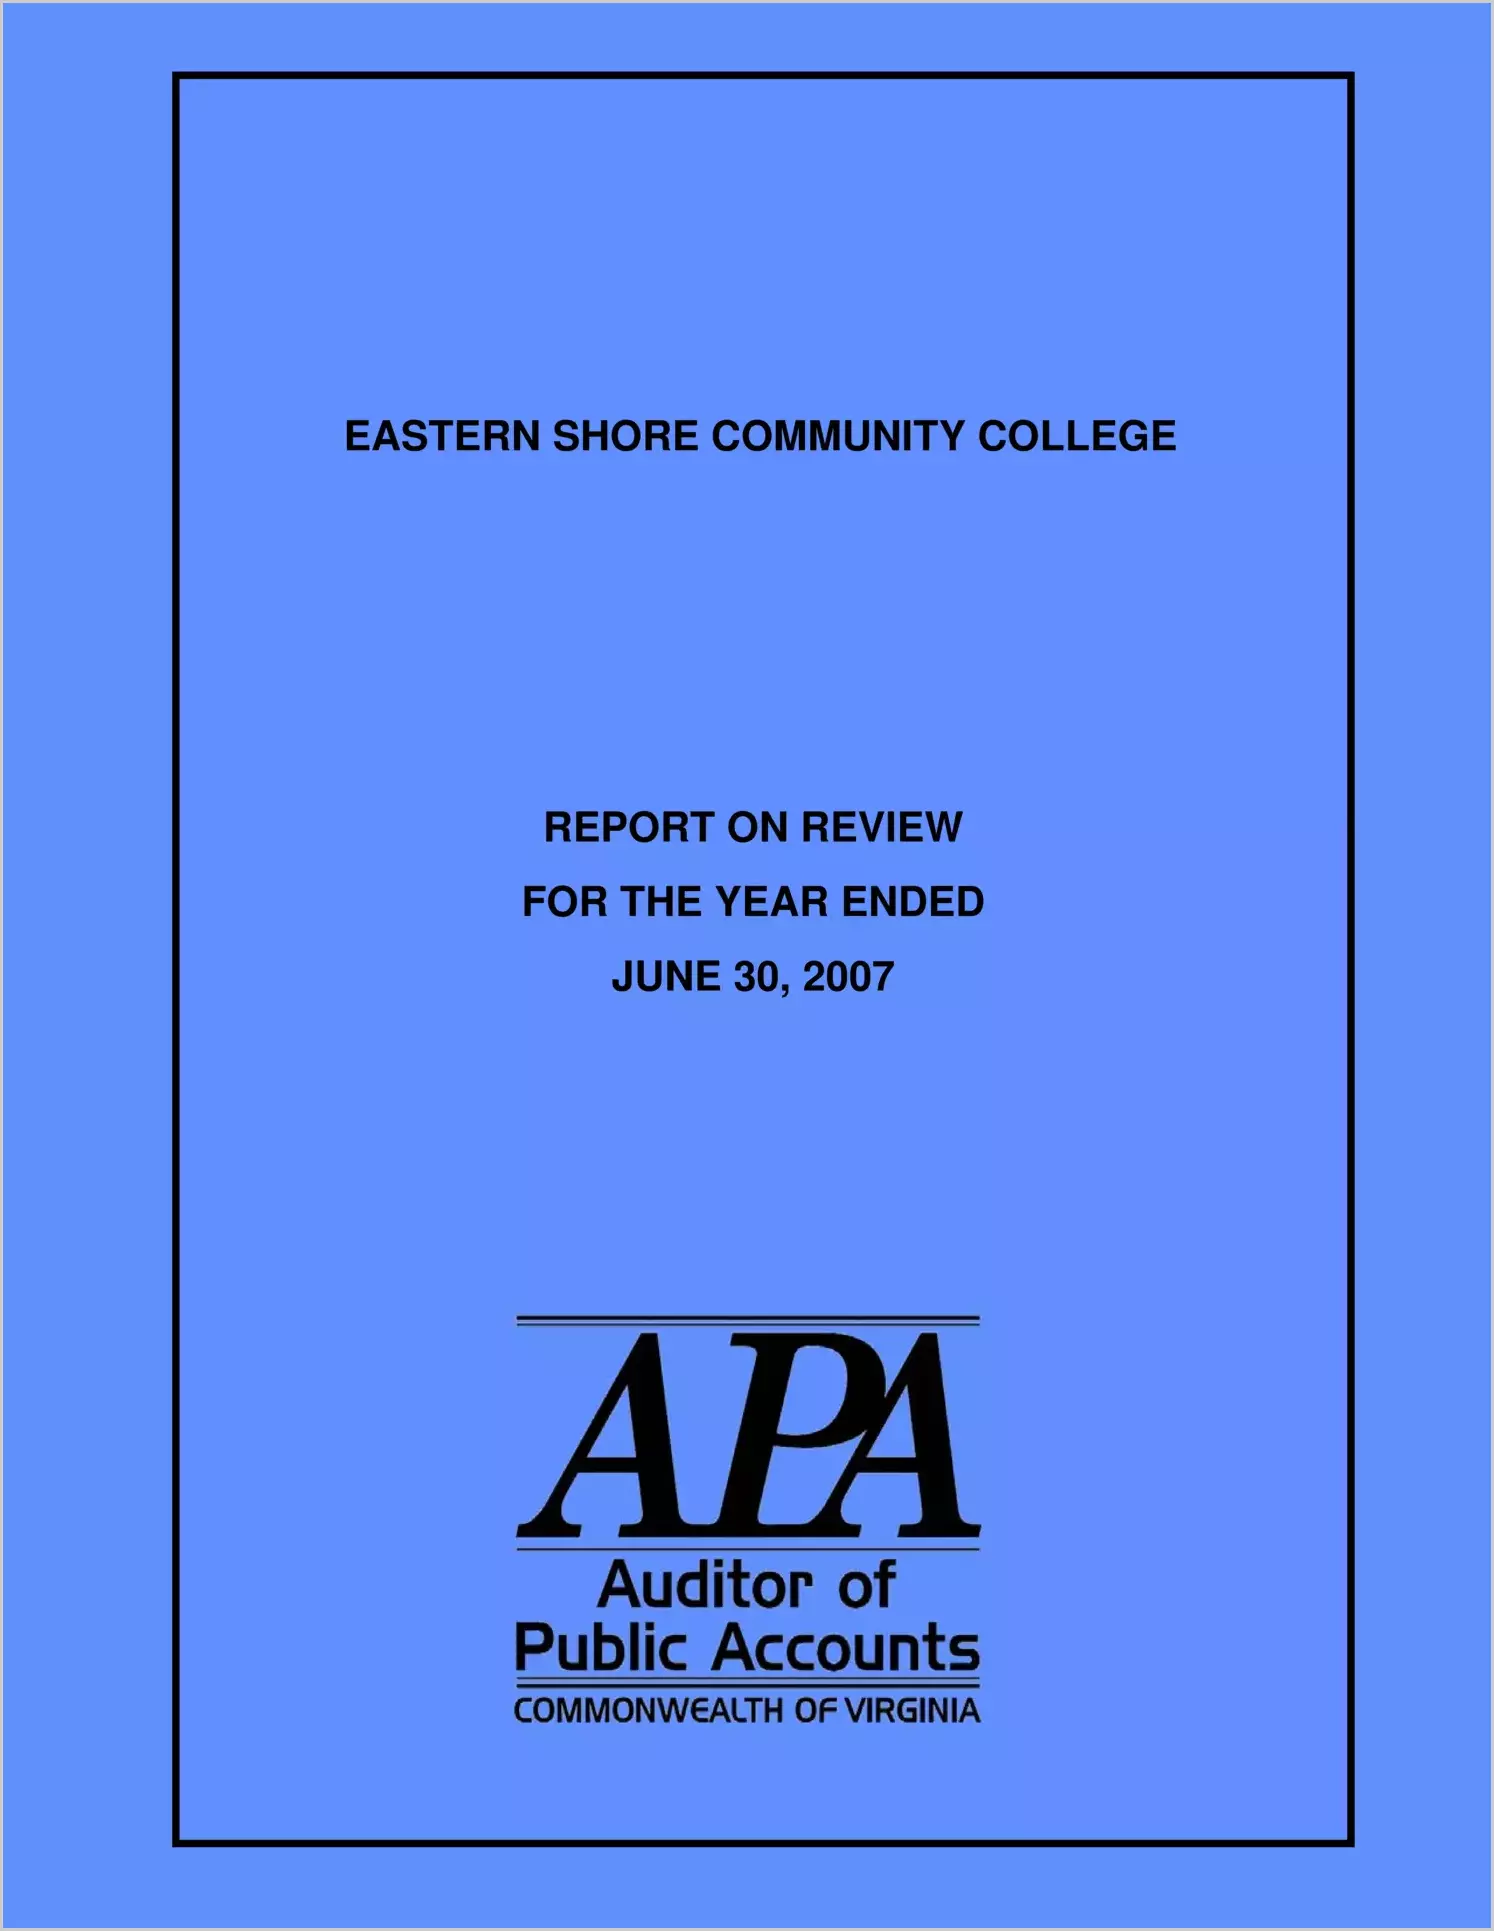 Eastern Shore Community College report on review for the year ended June 30, 2007